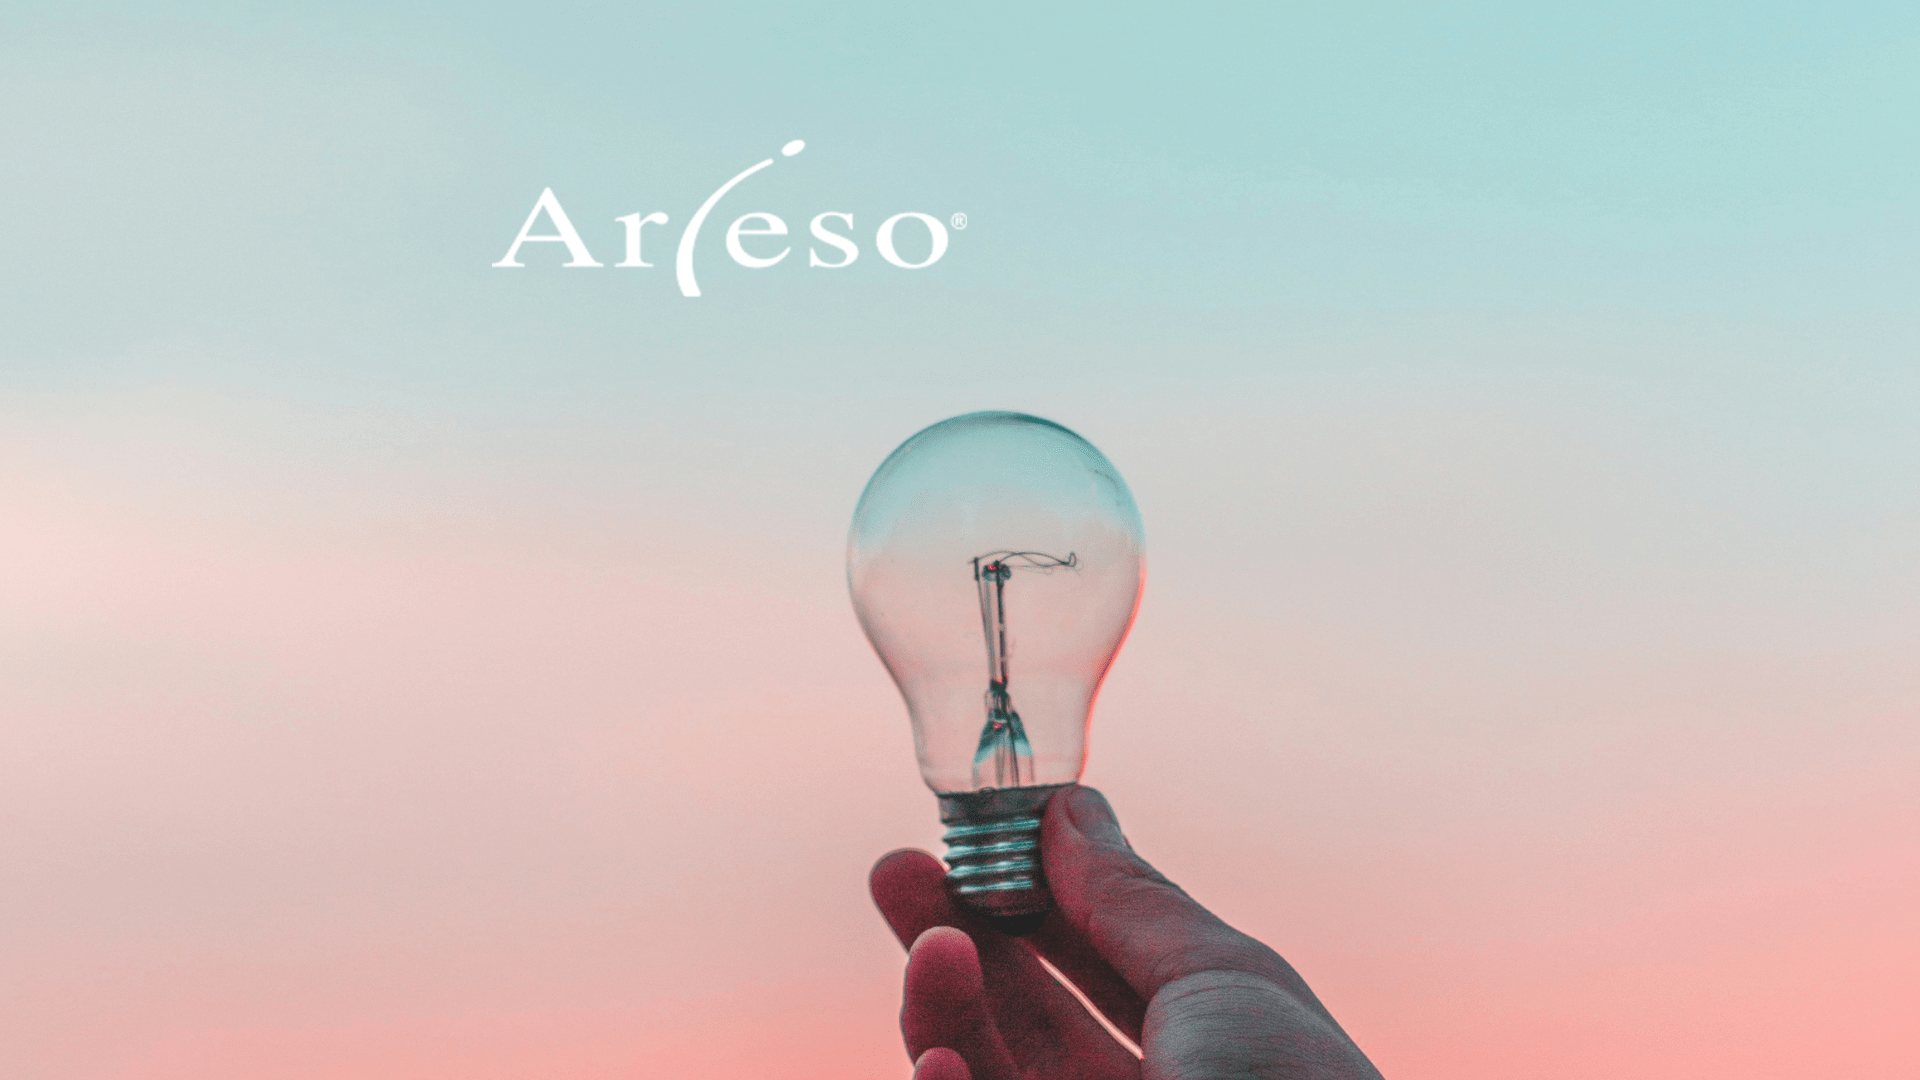 Creating content to drive attention for Arieso